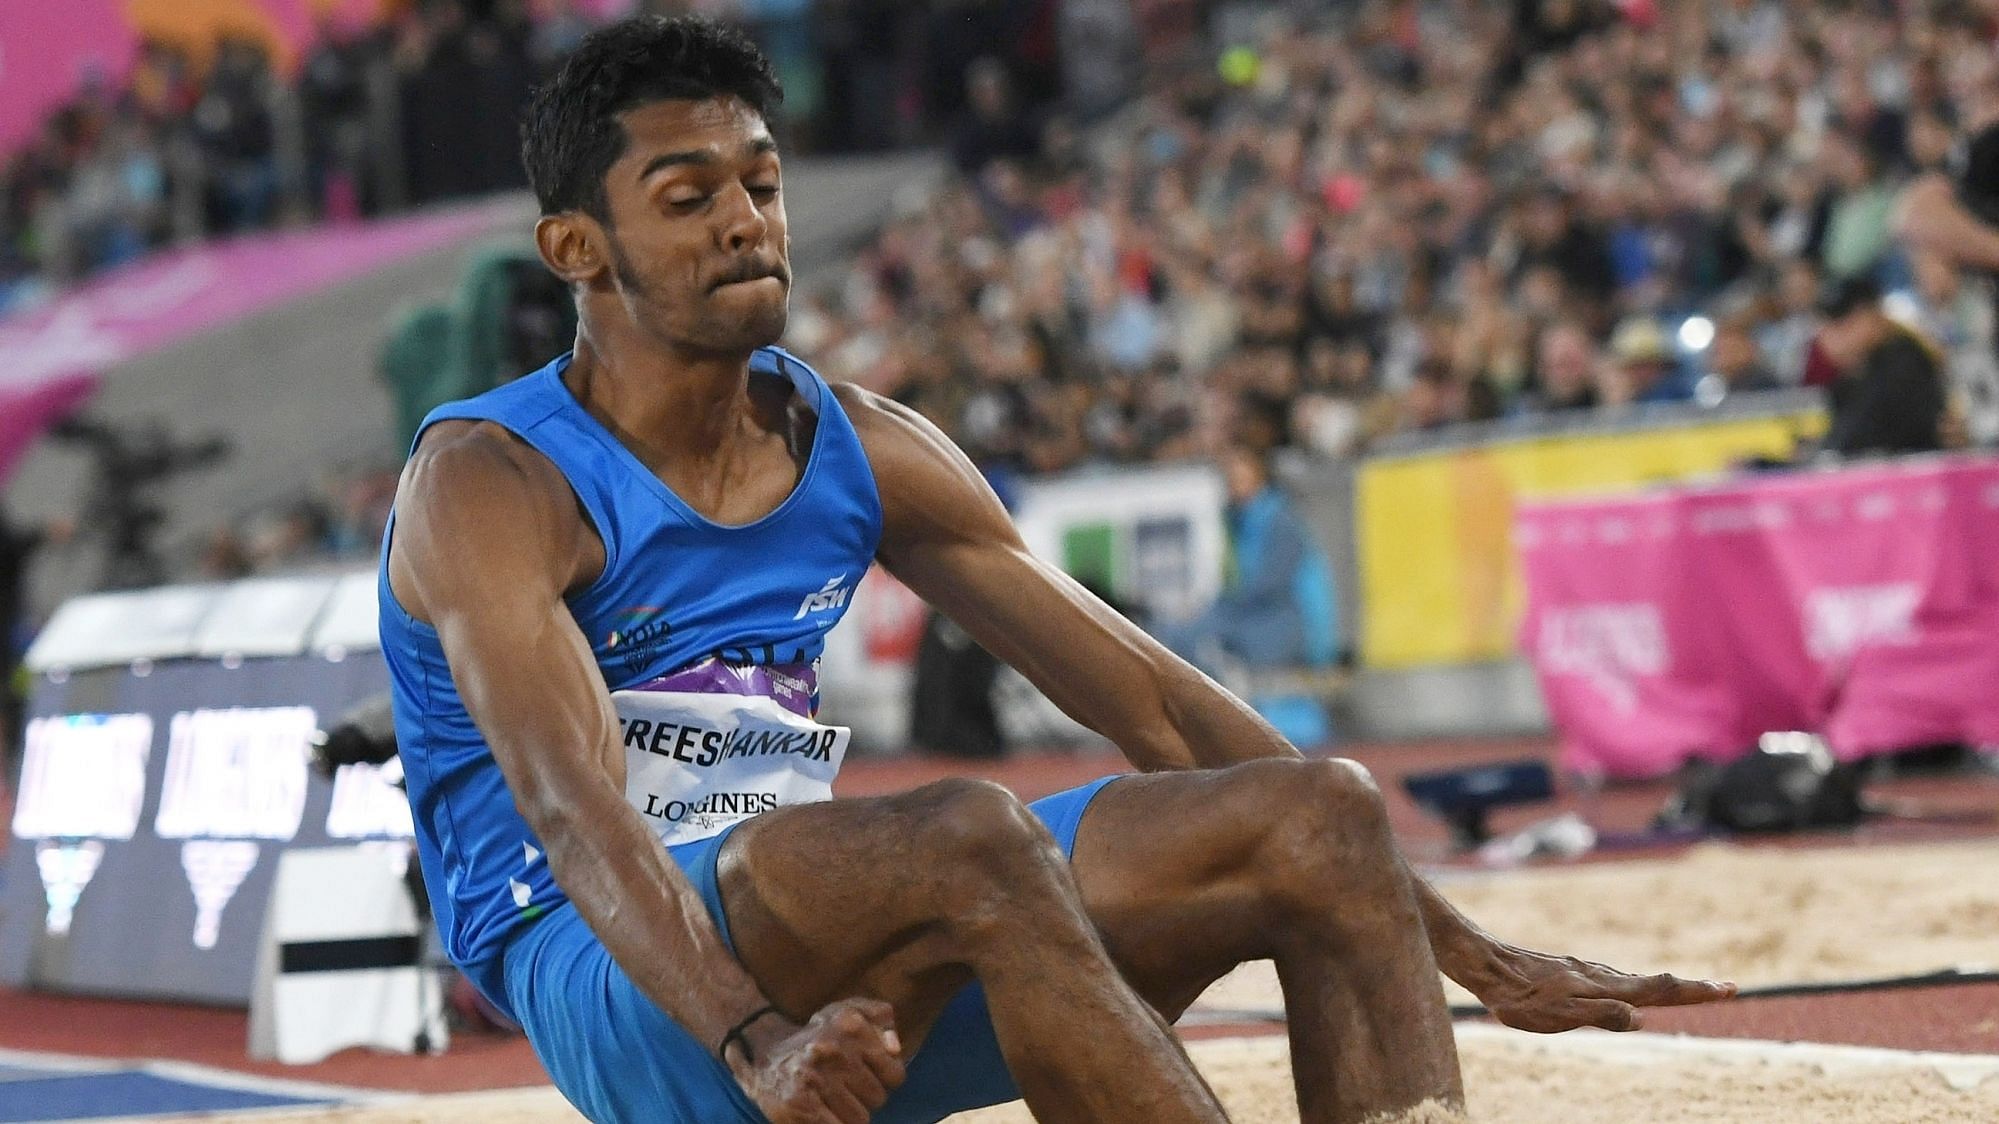 <div class="paragraphs"><p>Murali Sreeshankar on Thursday became the first Indian to win a silver medal in the men's long jump at the Commonwealth Games.&nbsp; &nbsp;</p></div>